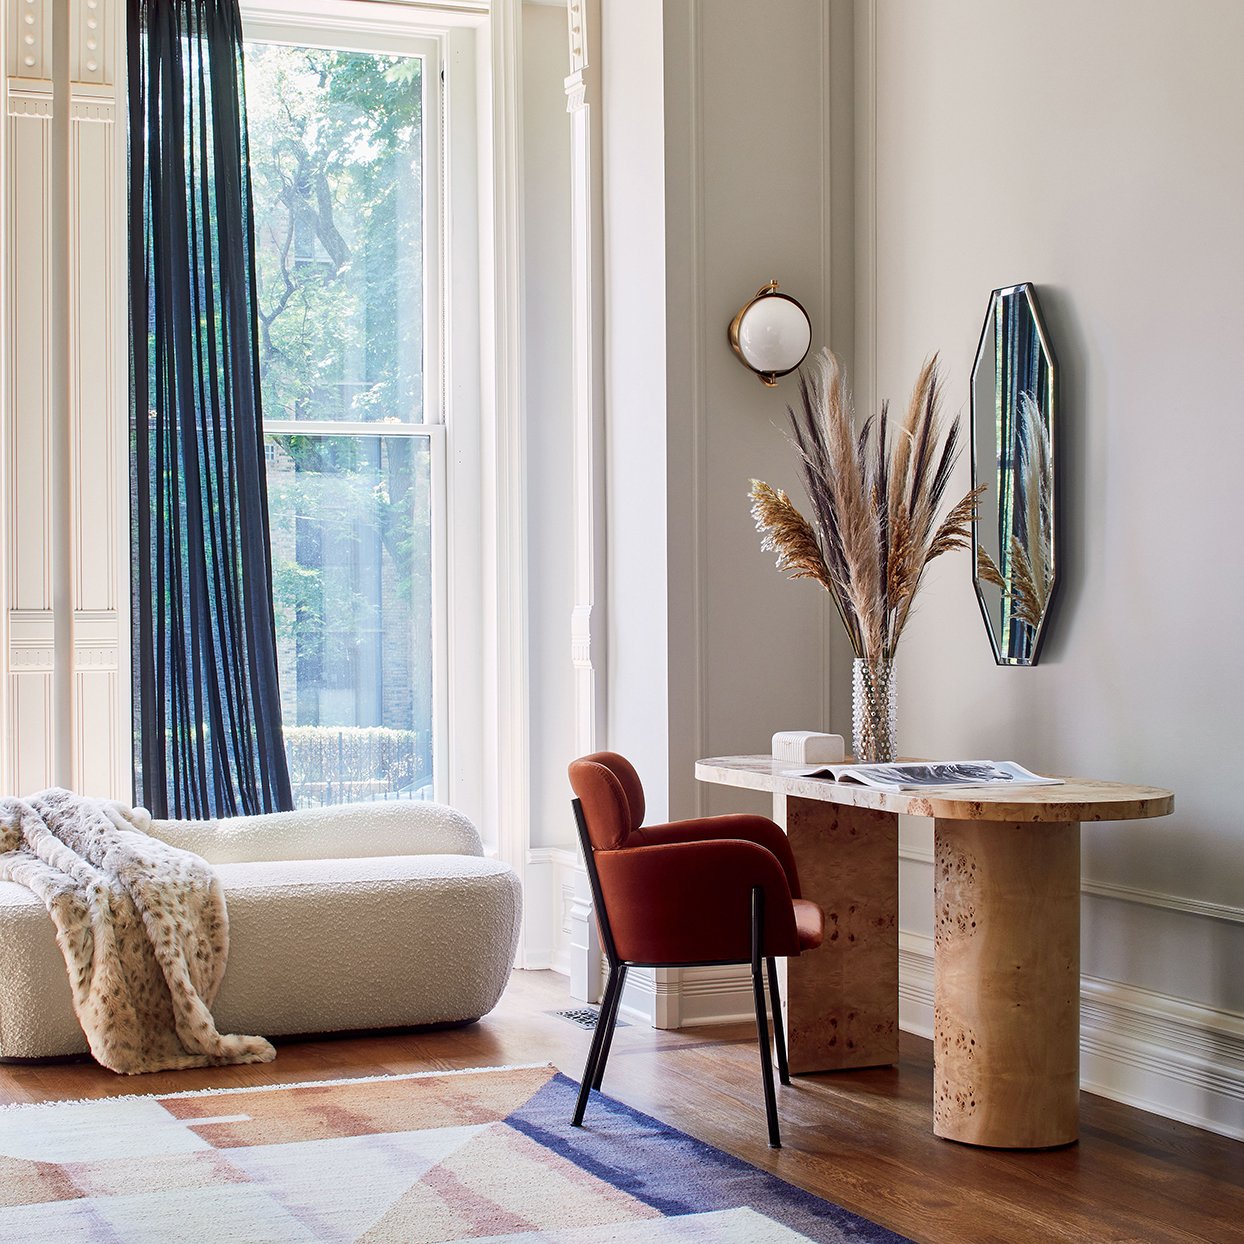 6 Design Trends That Will Define 2021, According to the Experts at CB2